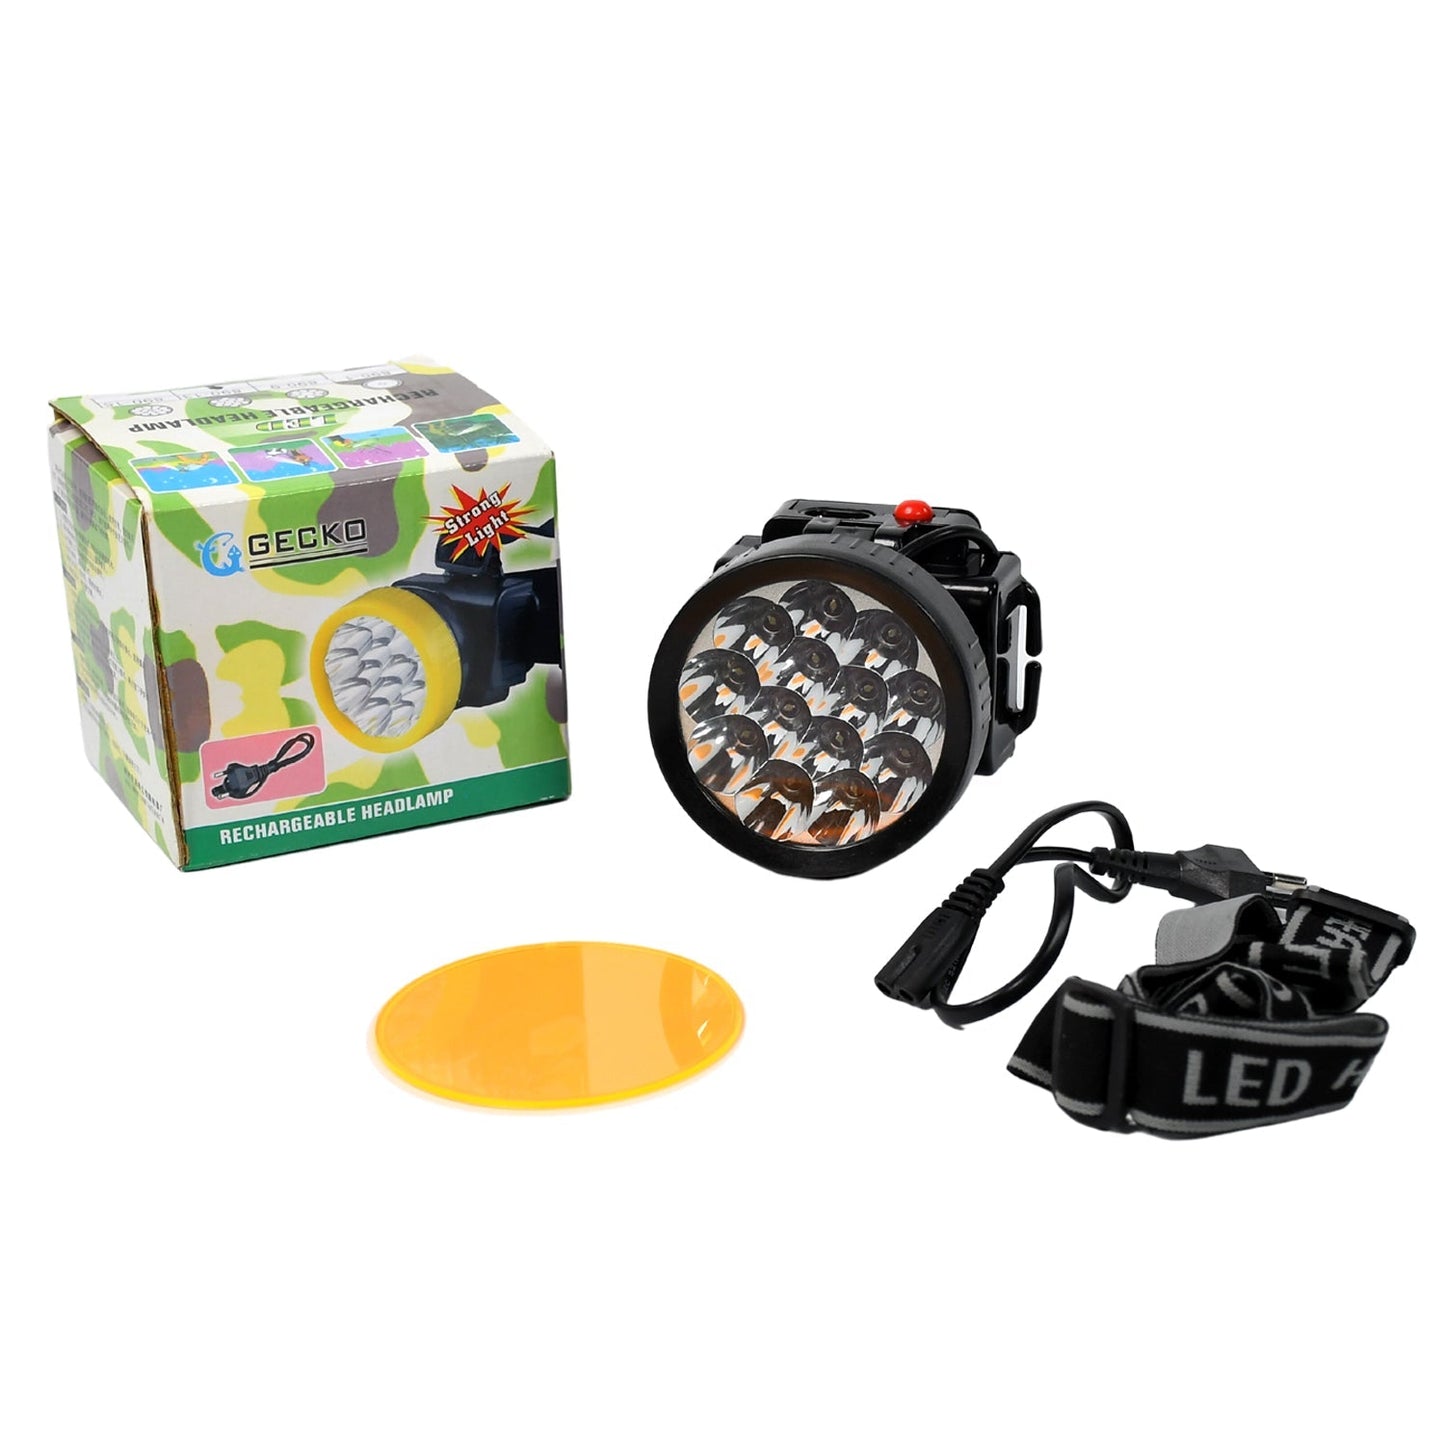 7519 HEAD LAMP 13 LED LONG RANGE RECHARGEABLE HEADLAMP ADJUSTMENT LAMP USE FOR FARMERS, FISHING, CAMPING, HIKING, TREKKING, CYCLING